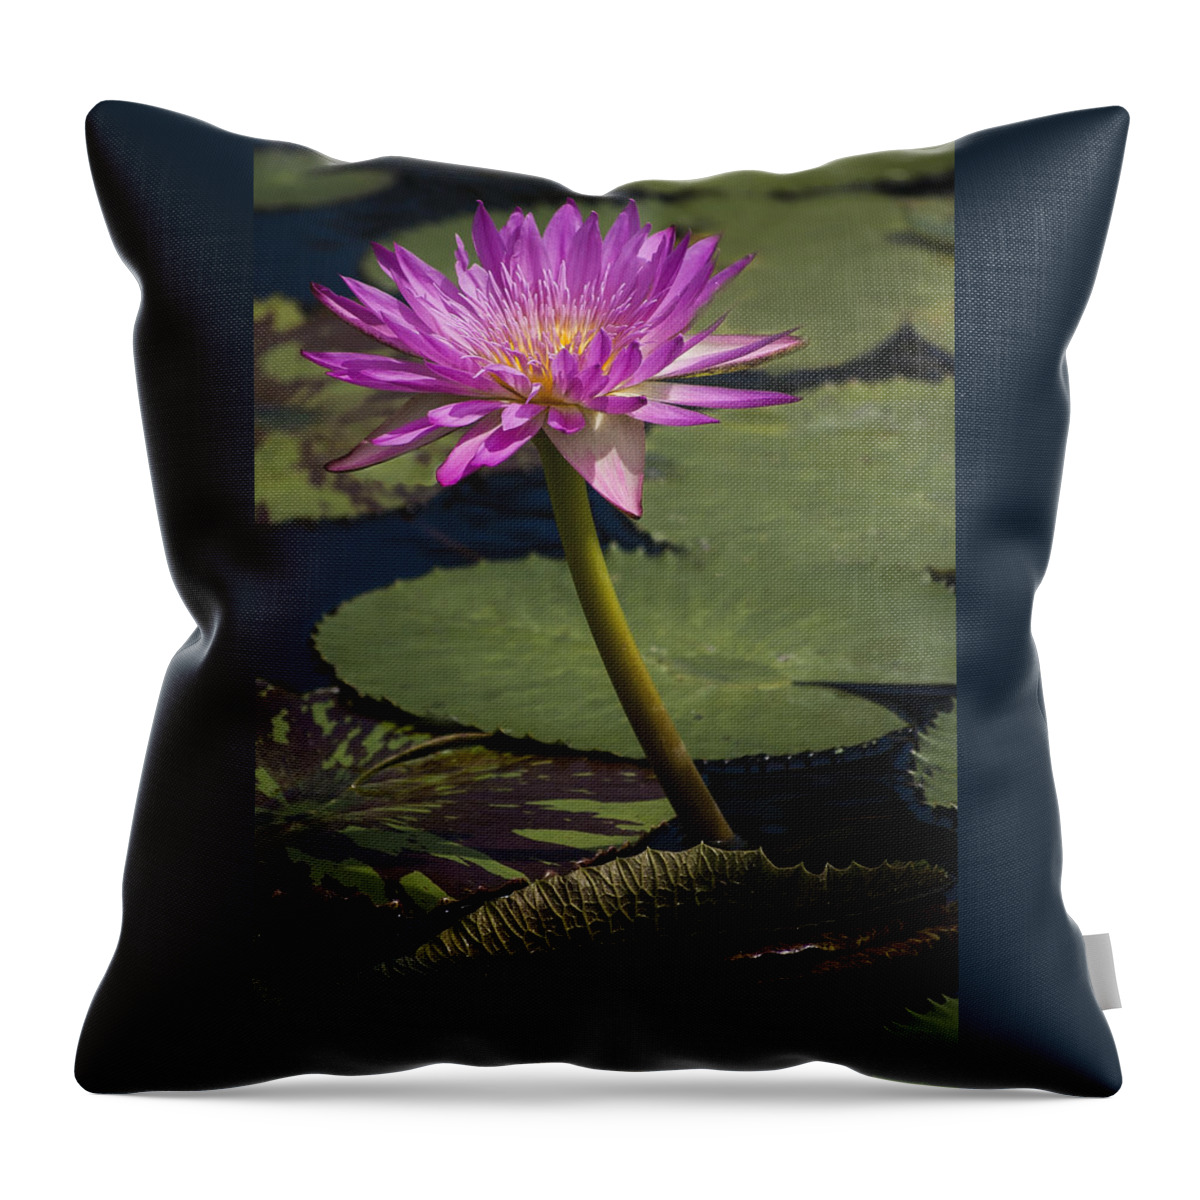 Background Throw Pillow featuring the photograph Tropical Water Lily by Penny Lisowski